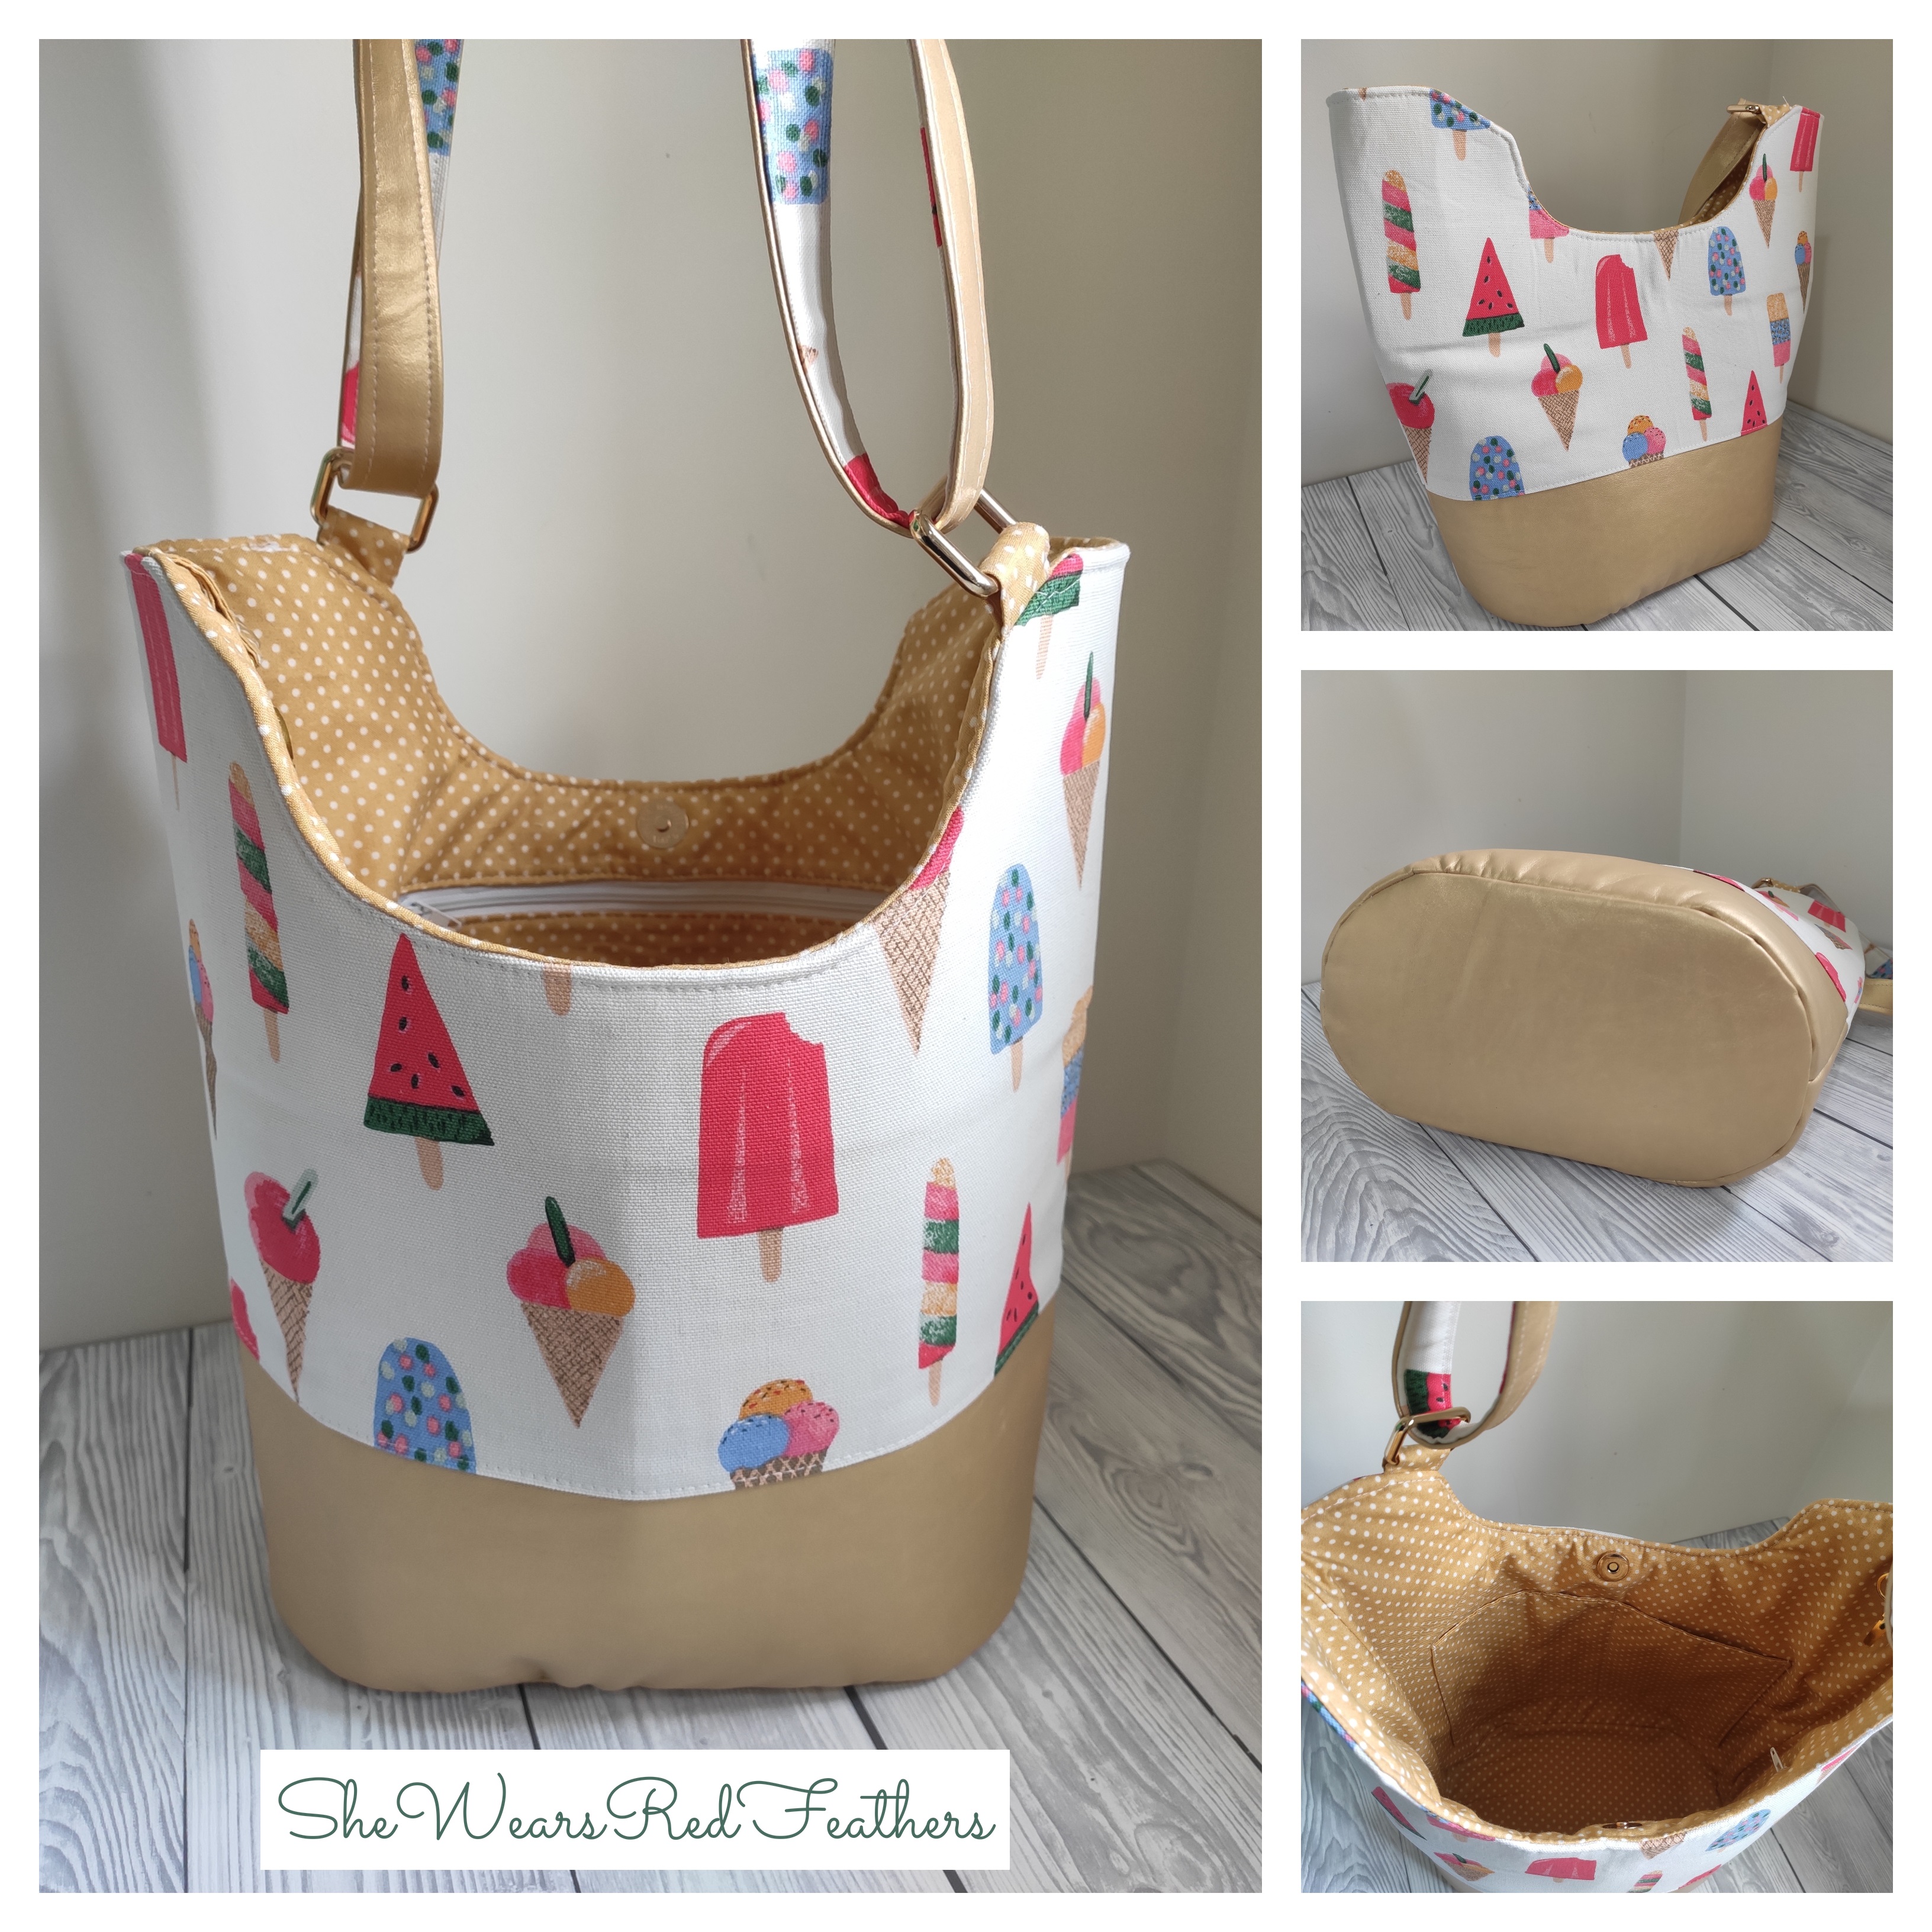 The Bucket Tote, made by She Wears Red Feathers